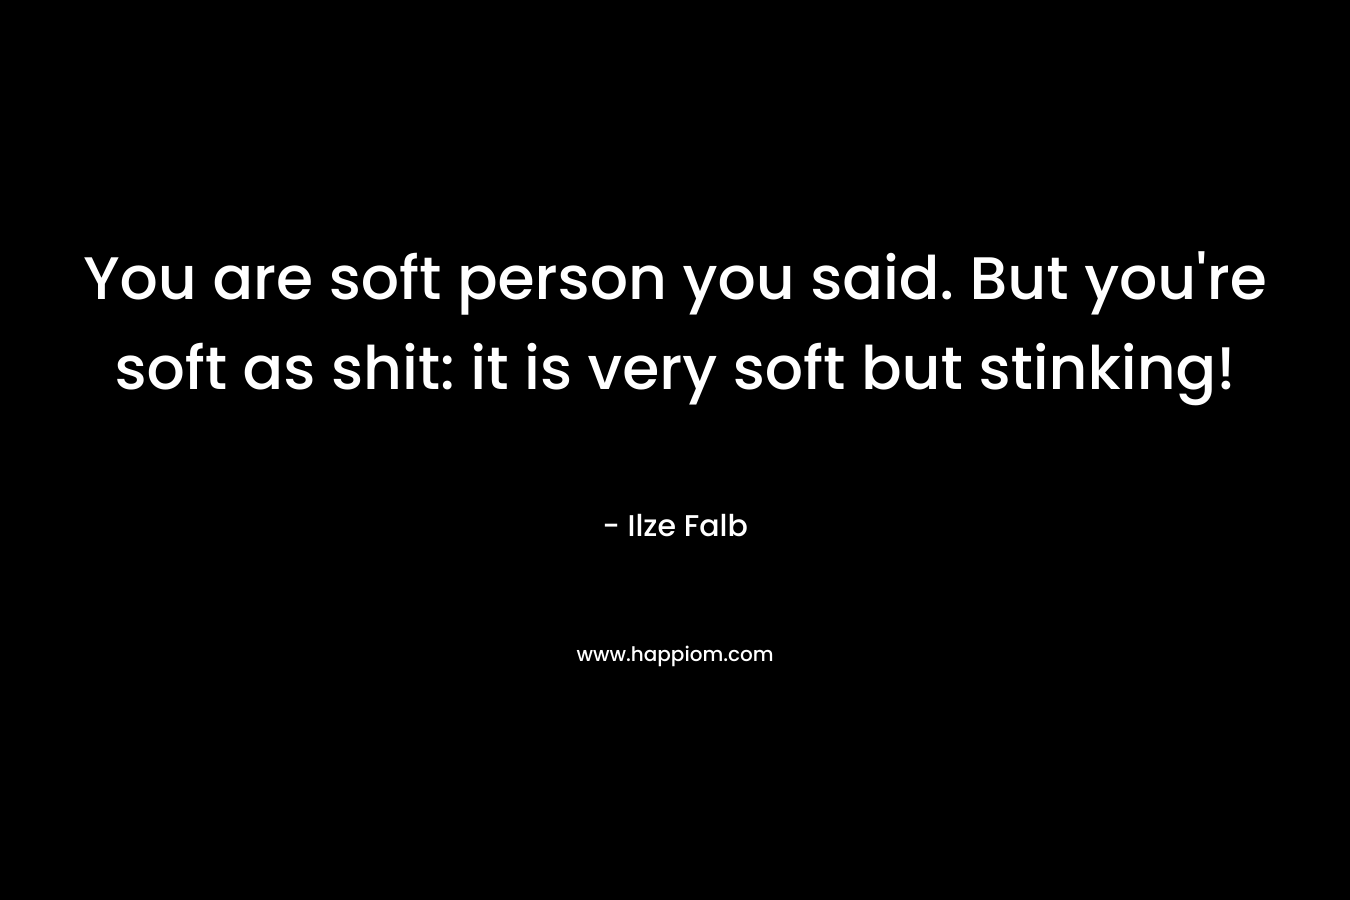 You are soft person you said. But you're soft as shit: it is very soft but stinking!